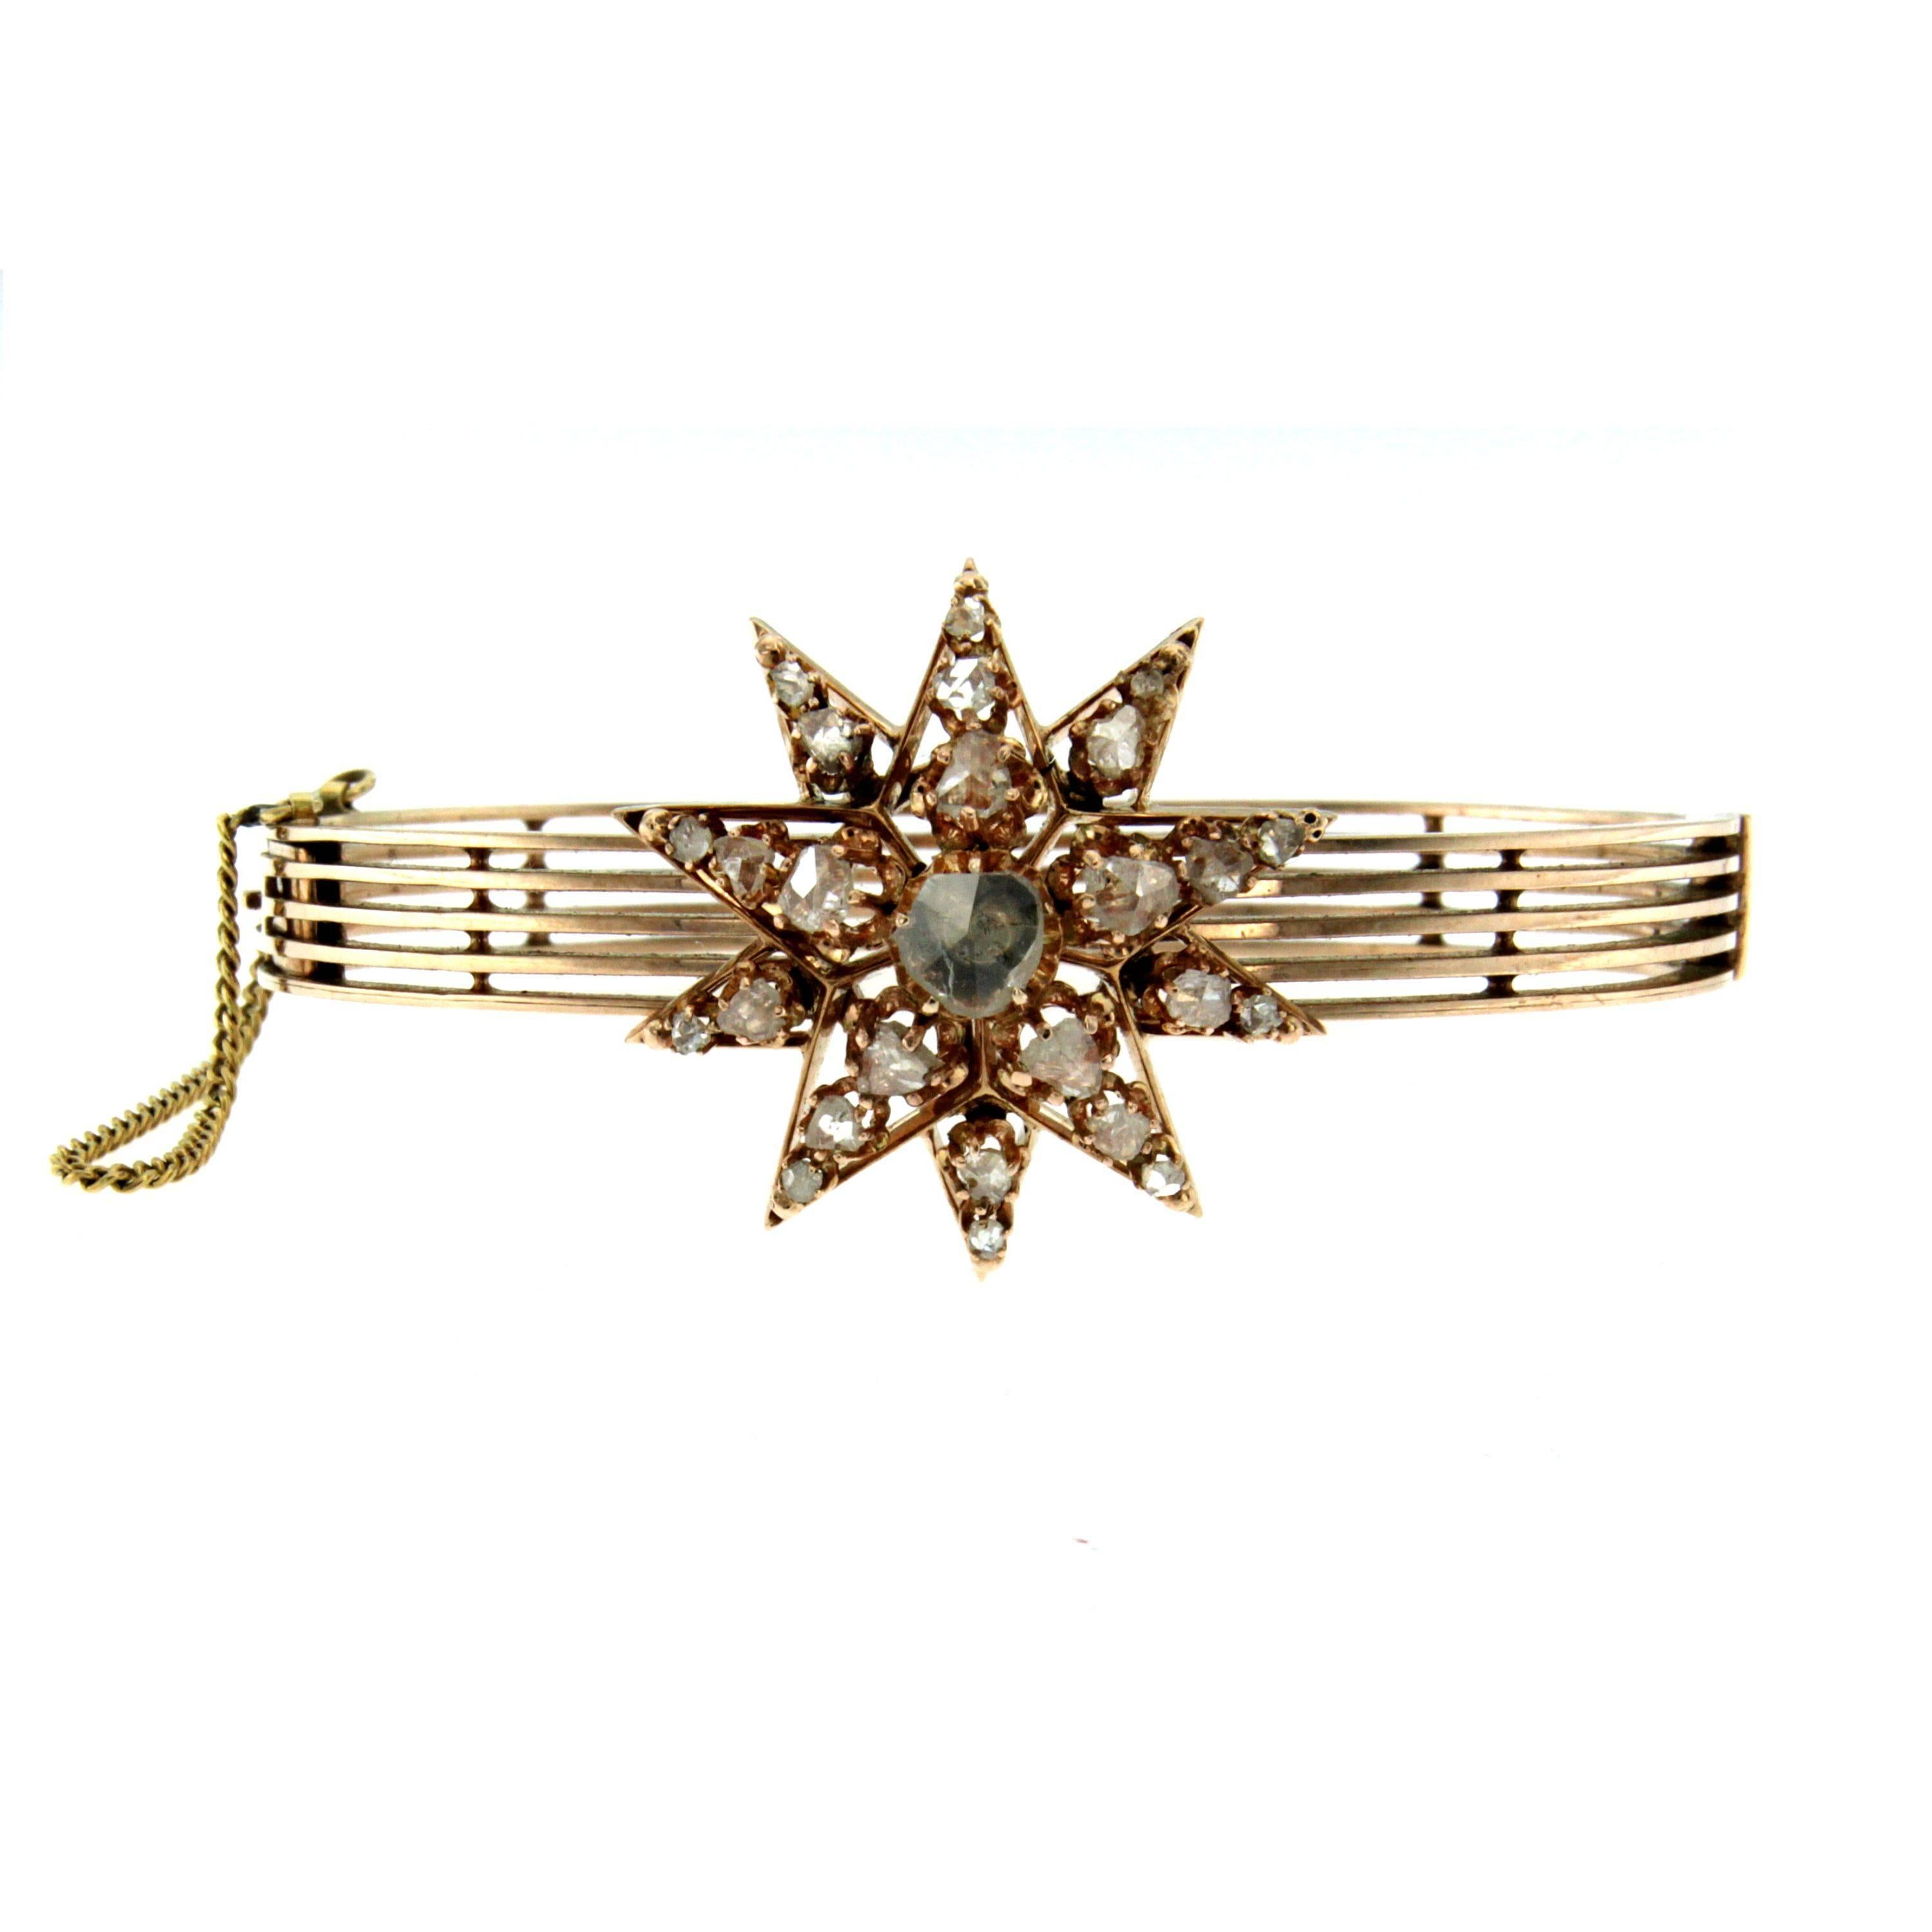 A gorgeous Victorian star design suite of earrings and bracelet, set with table-cut diamonds mounted in 12k rose Gold. All handcrafted, Circa 1880

Estimated total diamond weight 2.00 cts:
Earrings: 0.70 total carats
Bracelet:1.30 total